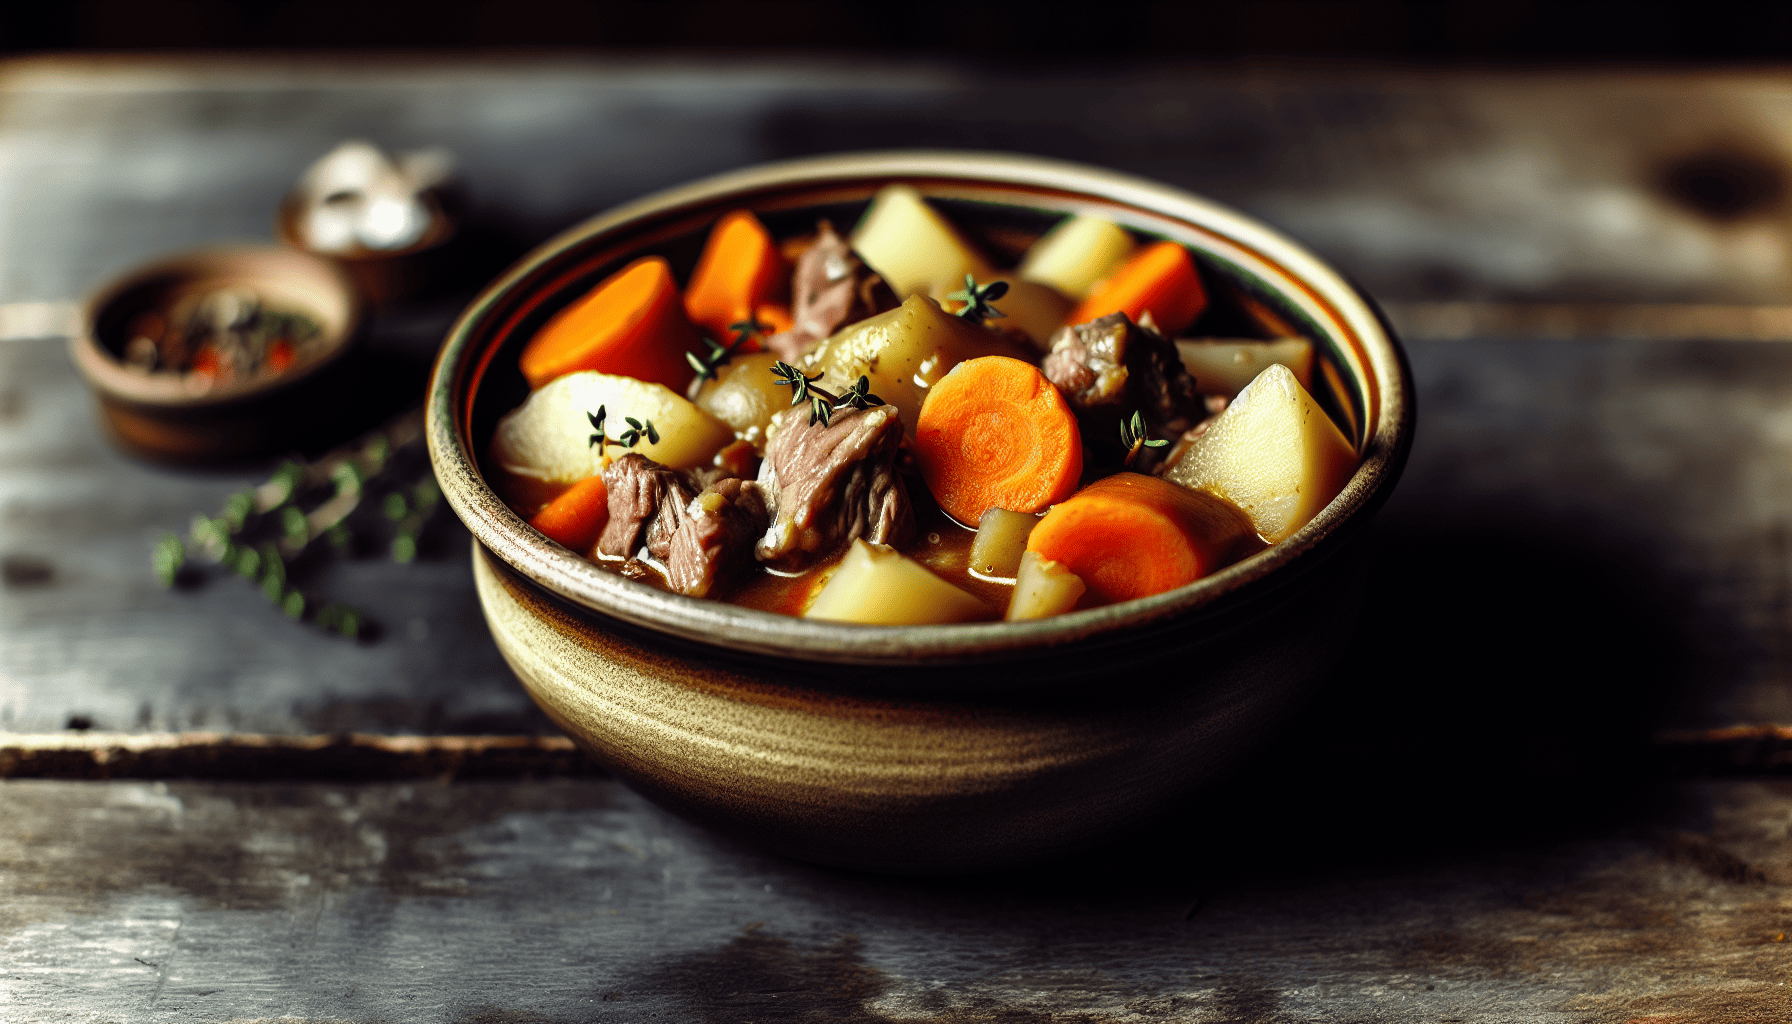 Traditional Irish stew with root vegetables